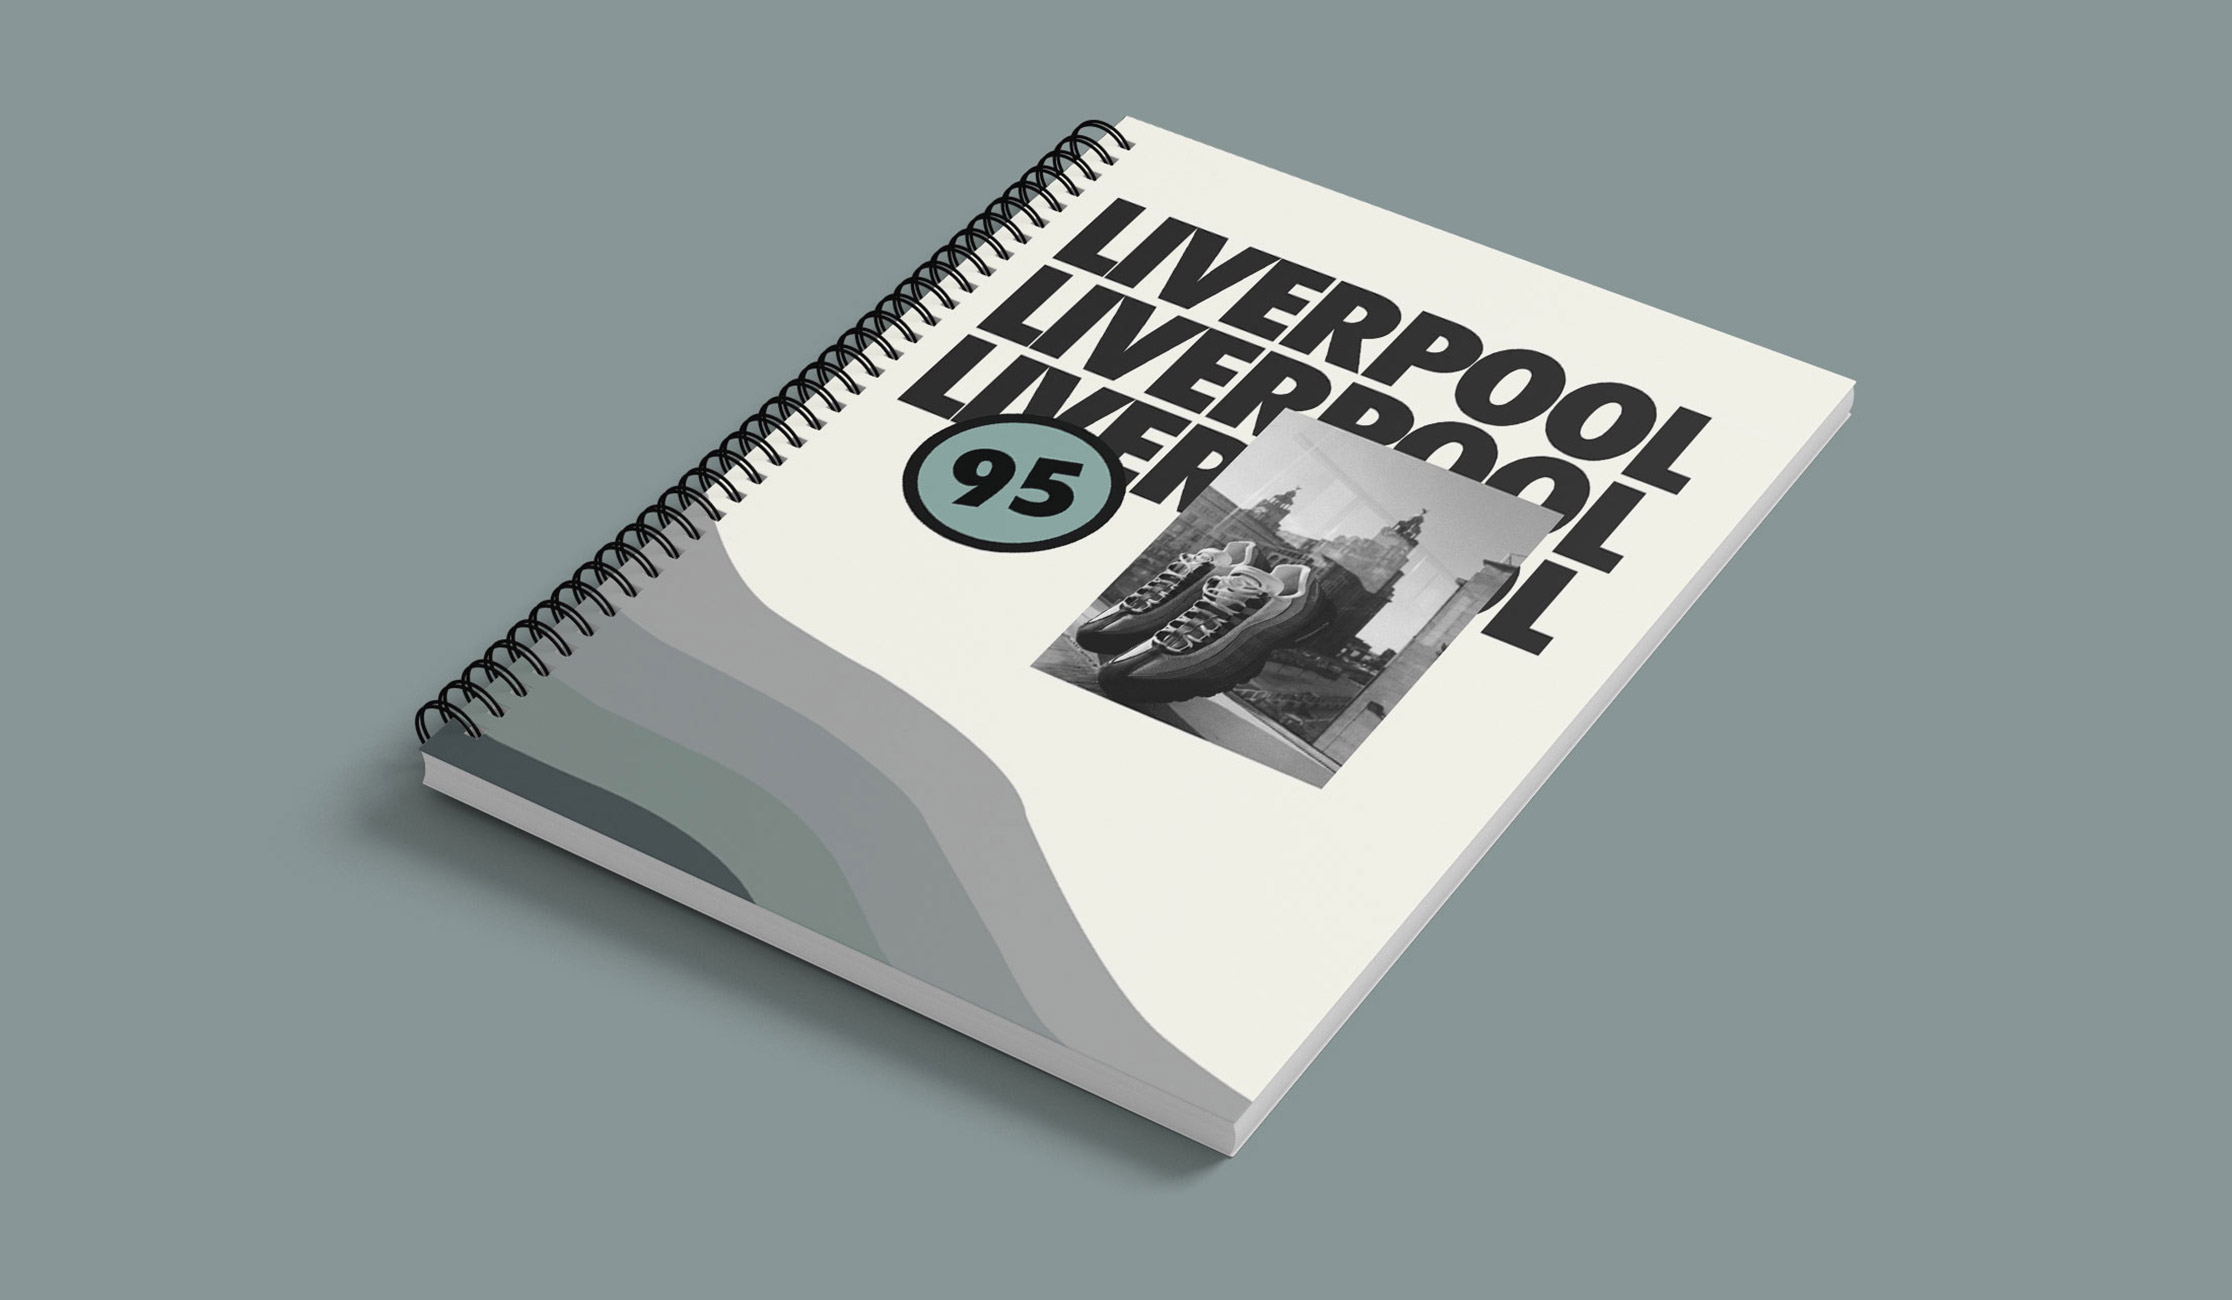 Mock-up of a publication, showing cover art of Nike 95 trainers and Liverpool typography